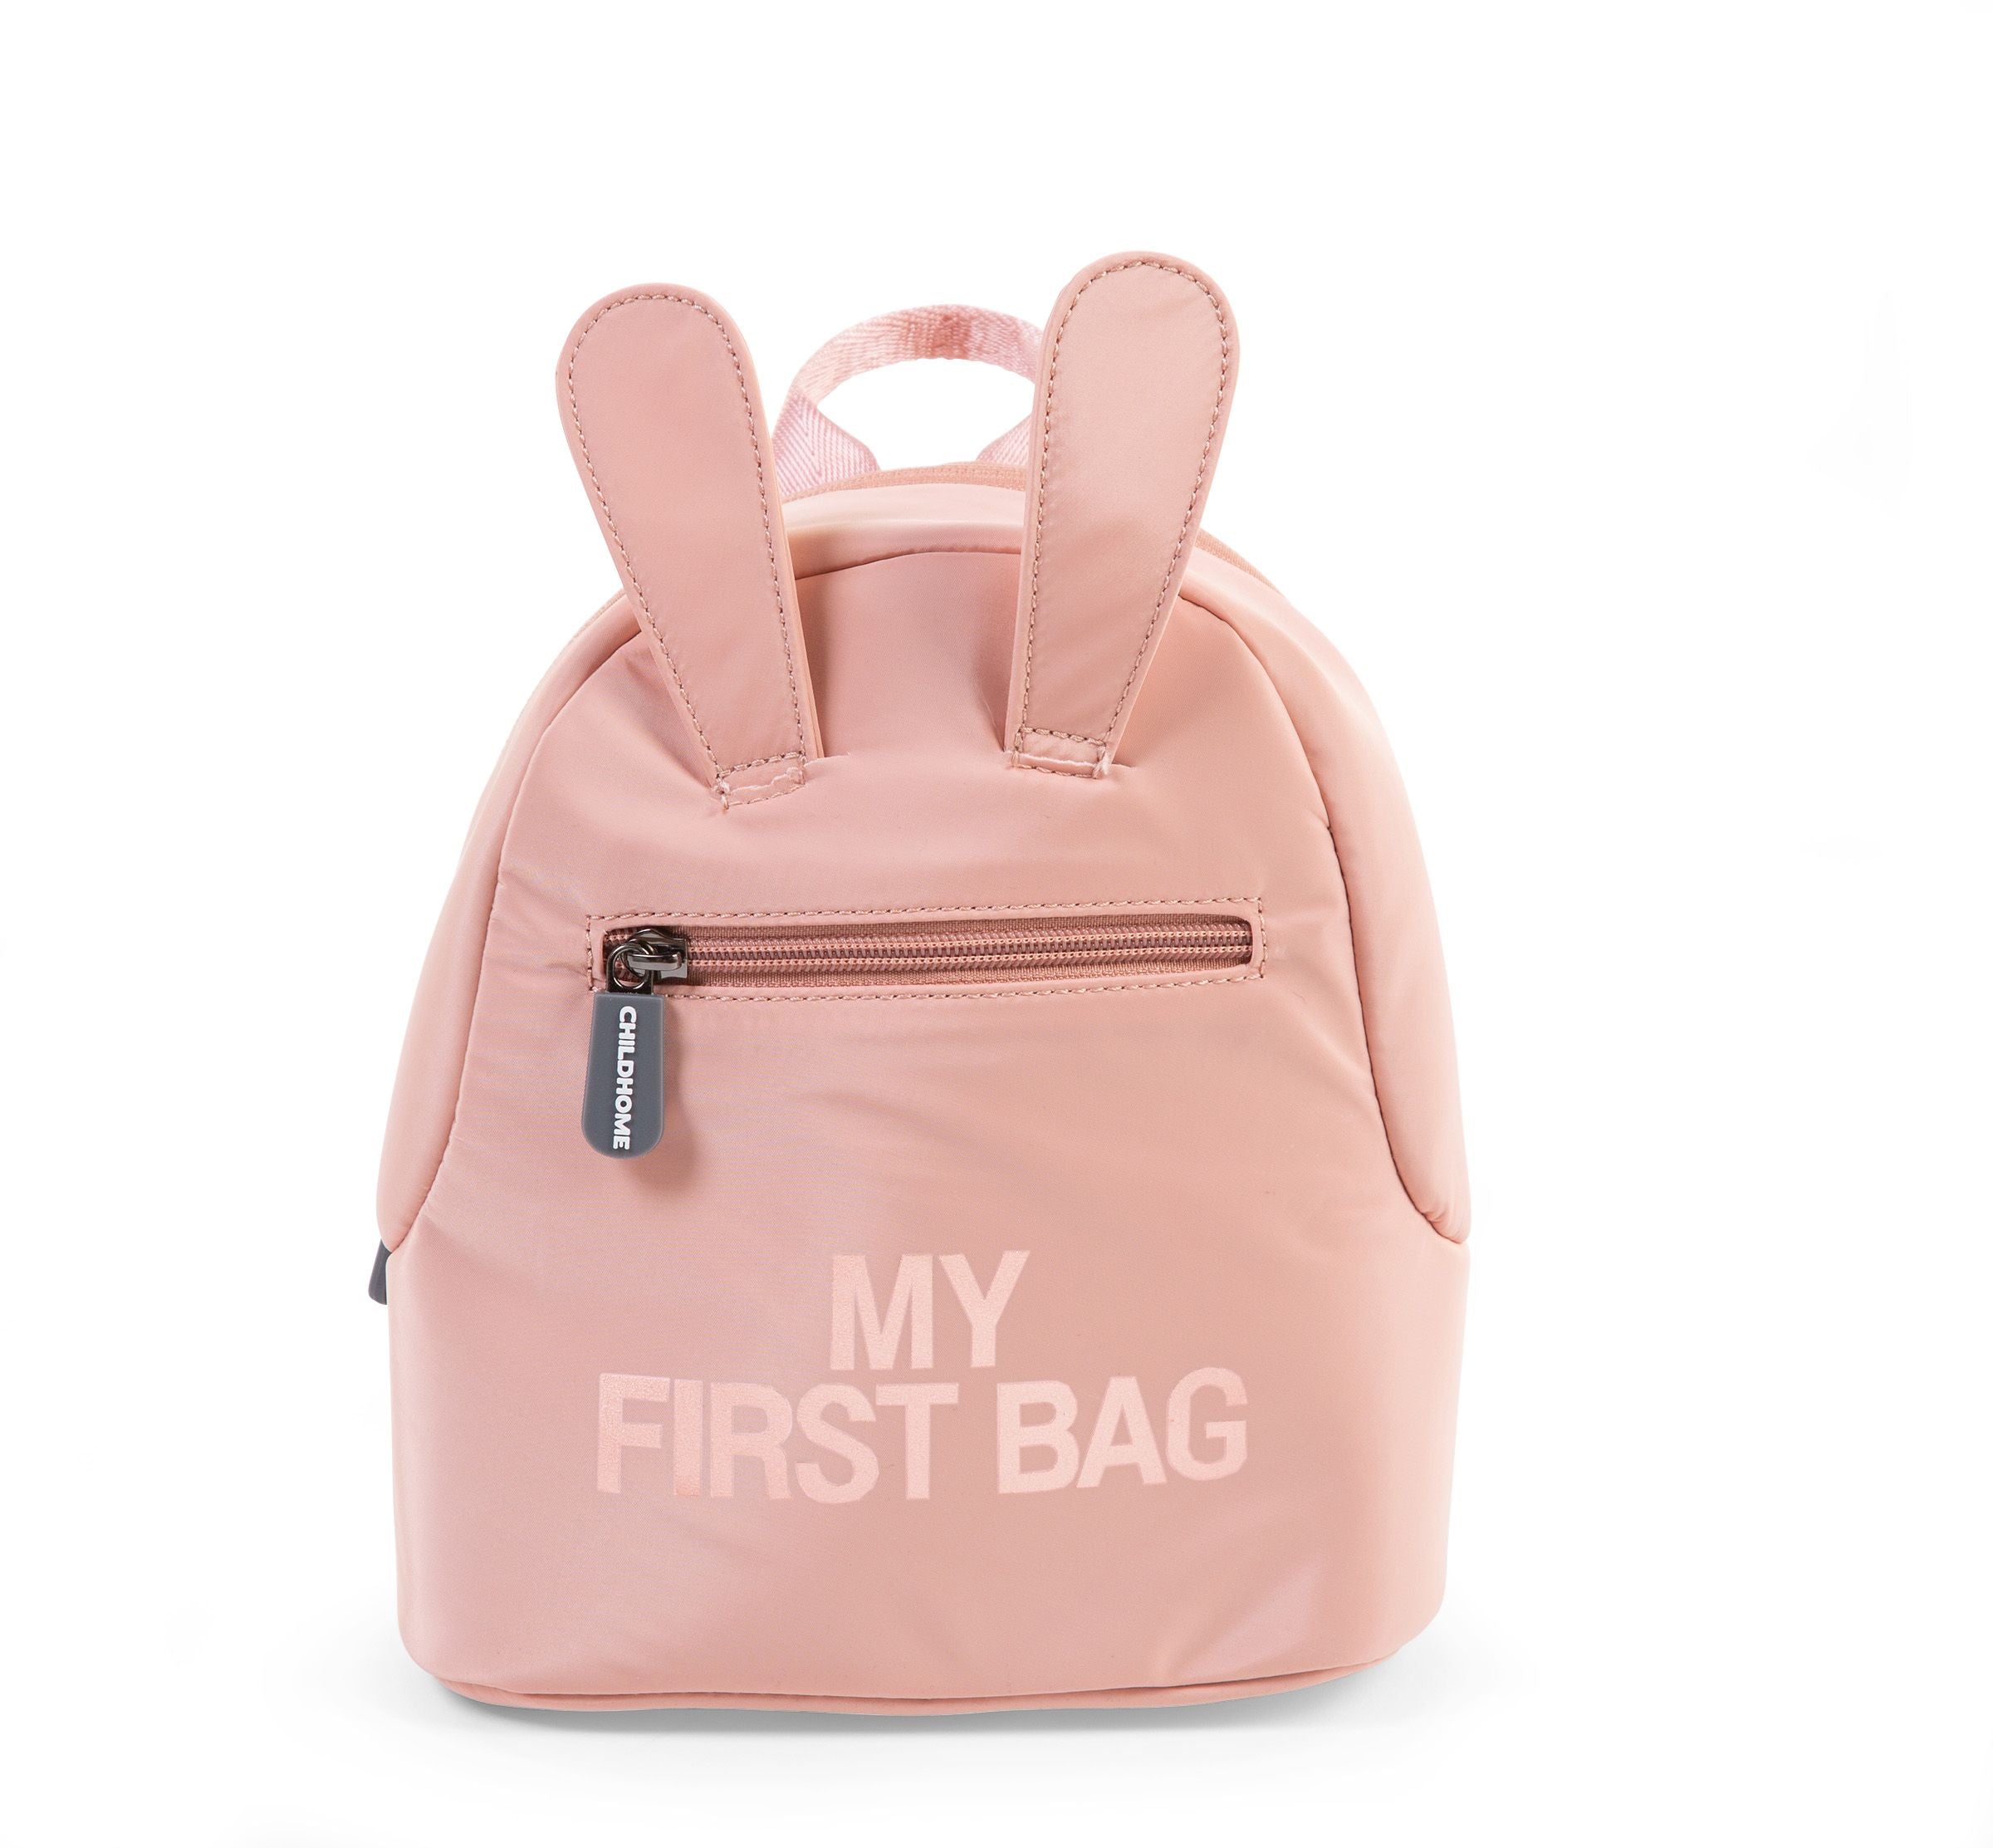 My First Bag Children's Backpack - Pink - MyLullaby